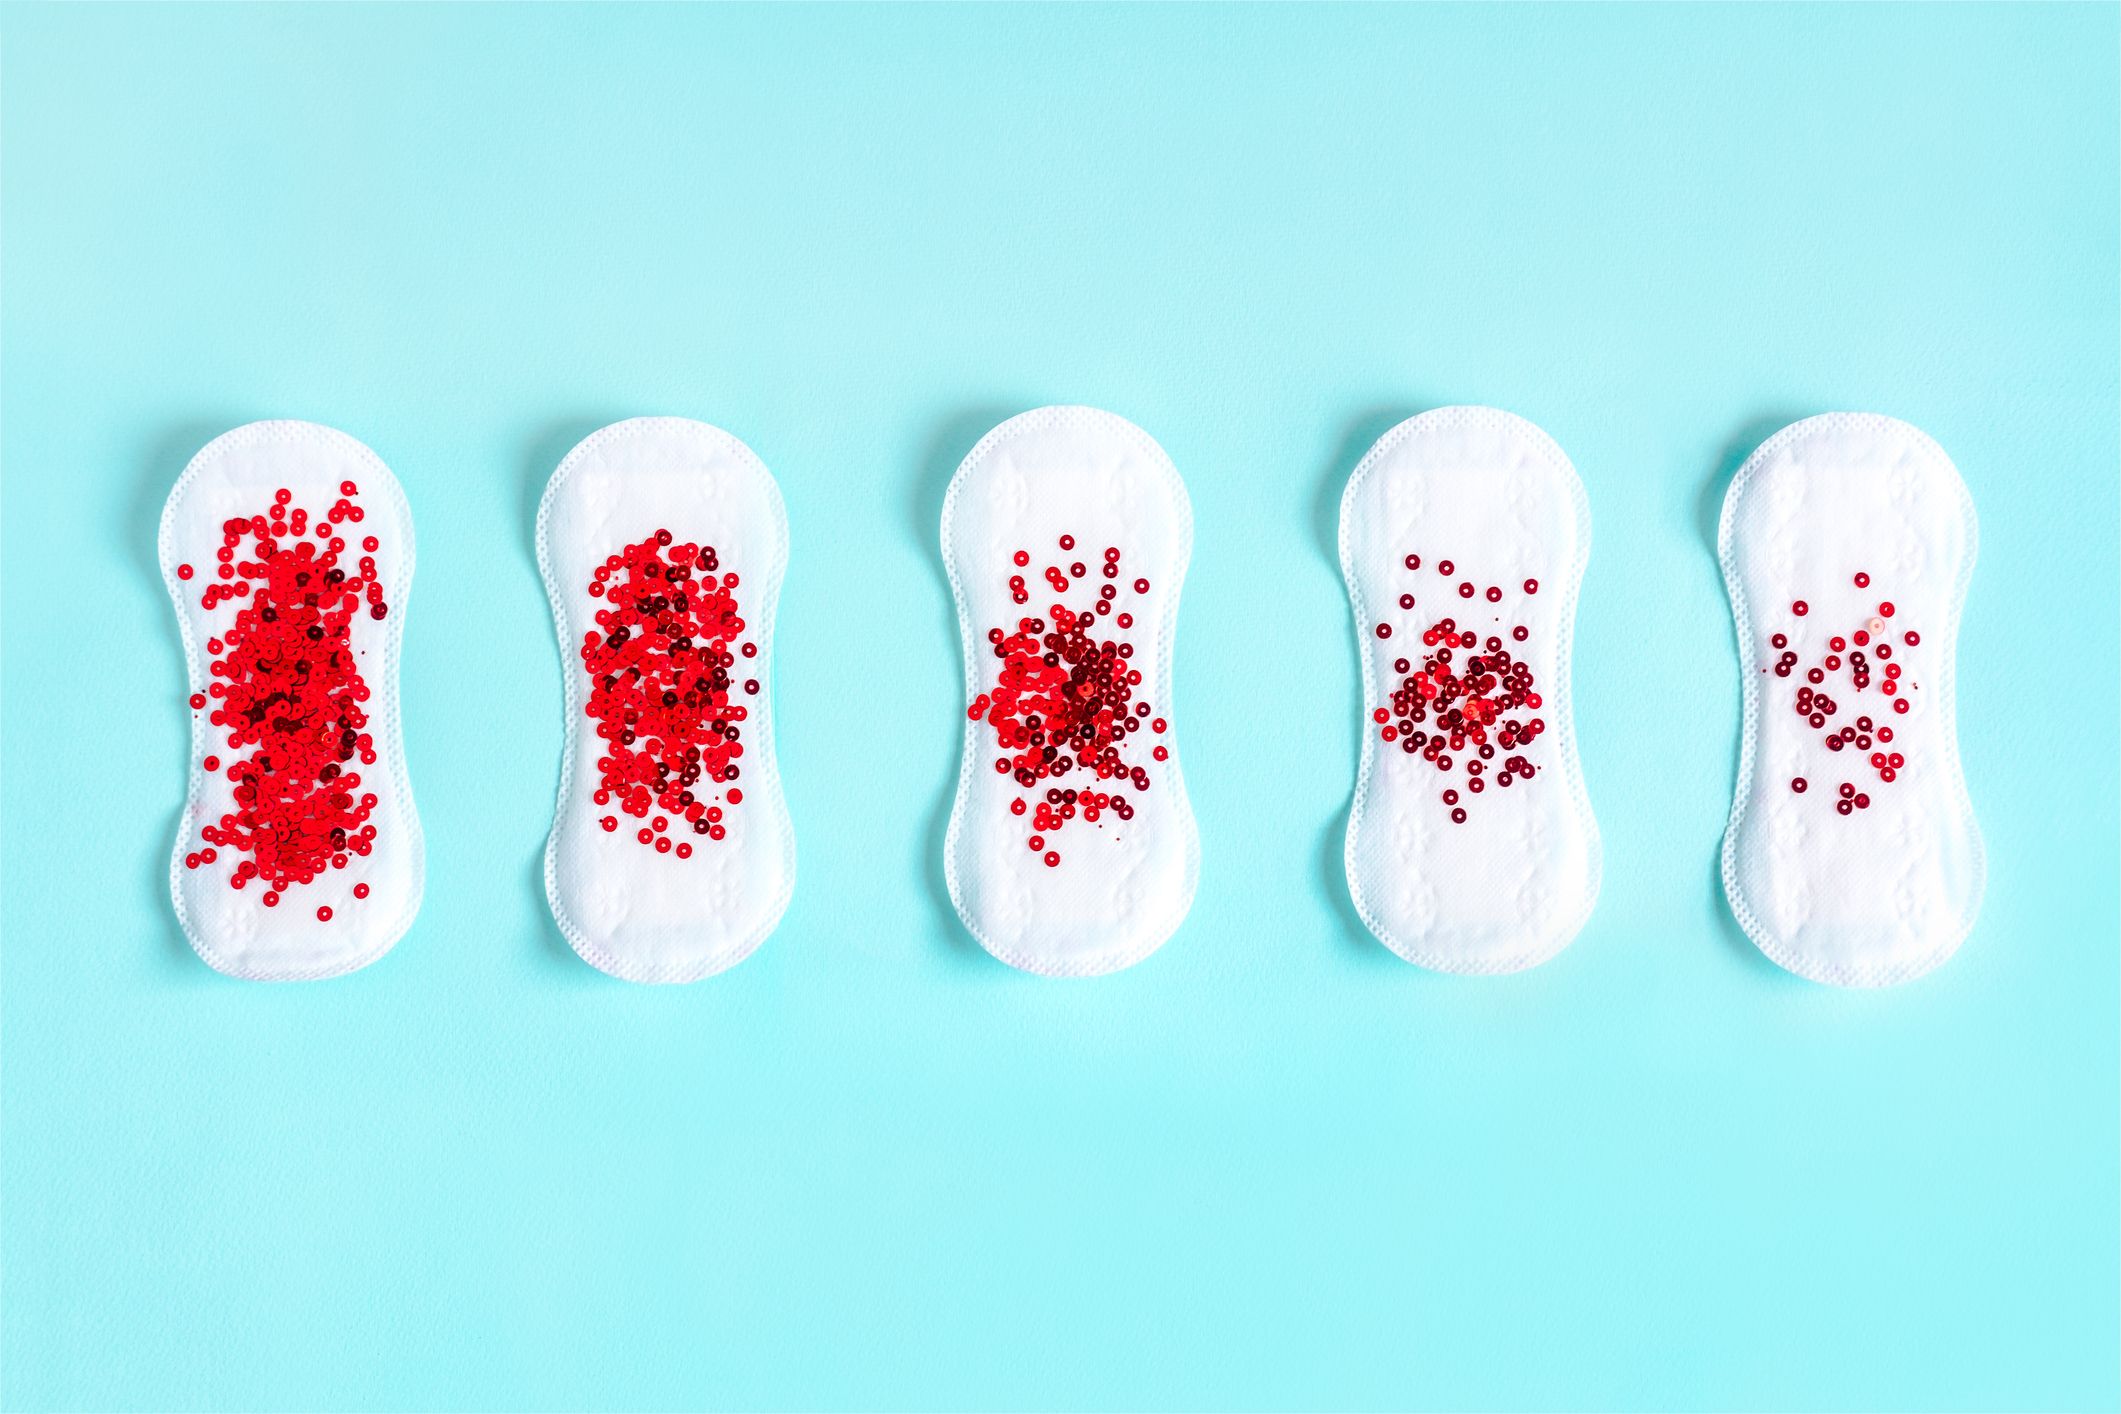 7 Causes of Irregular Periods - Reasons for Missed Period